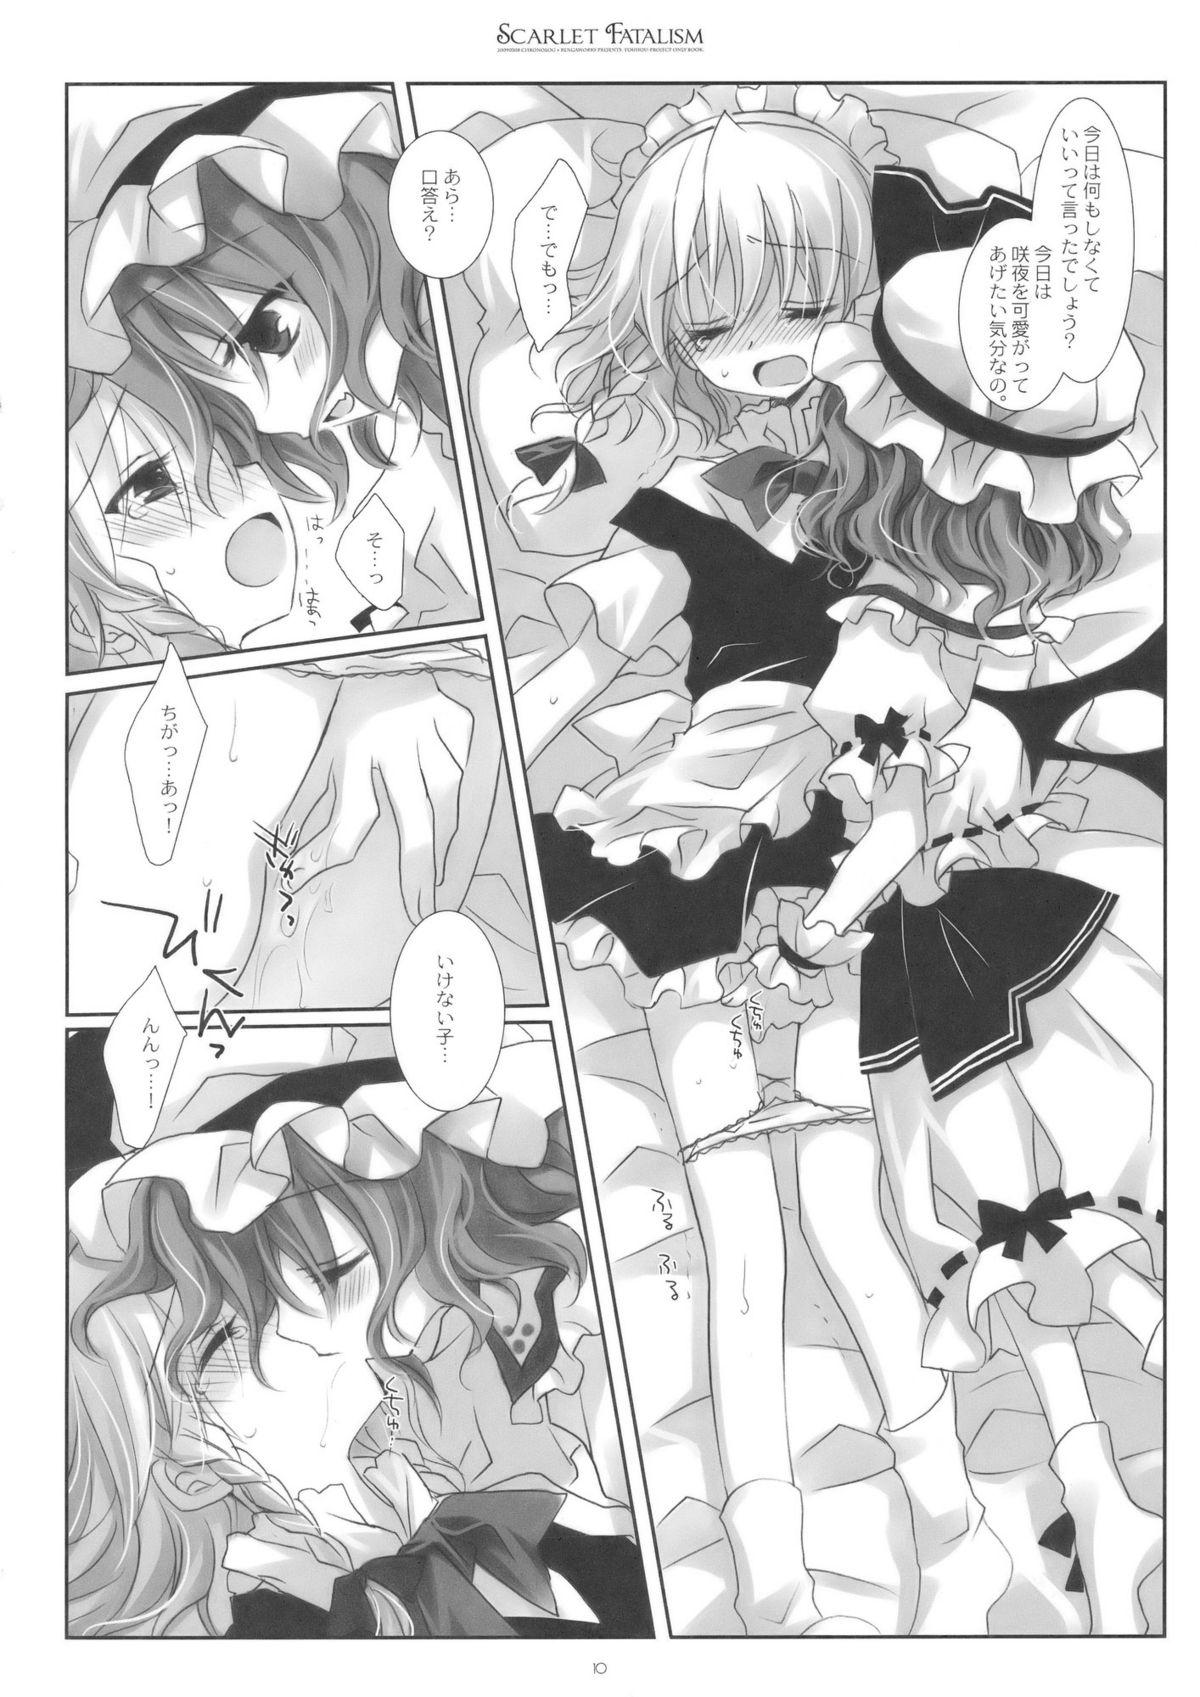 Exposed Scarlet Fatalism - Touhou project Sentones - Page 10